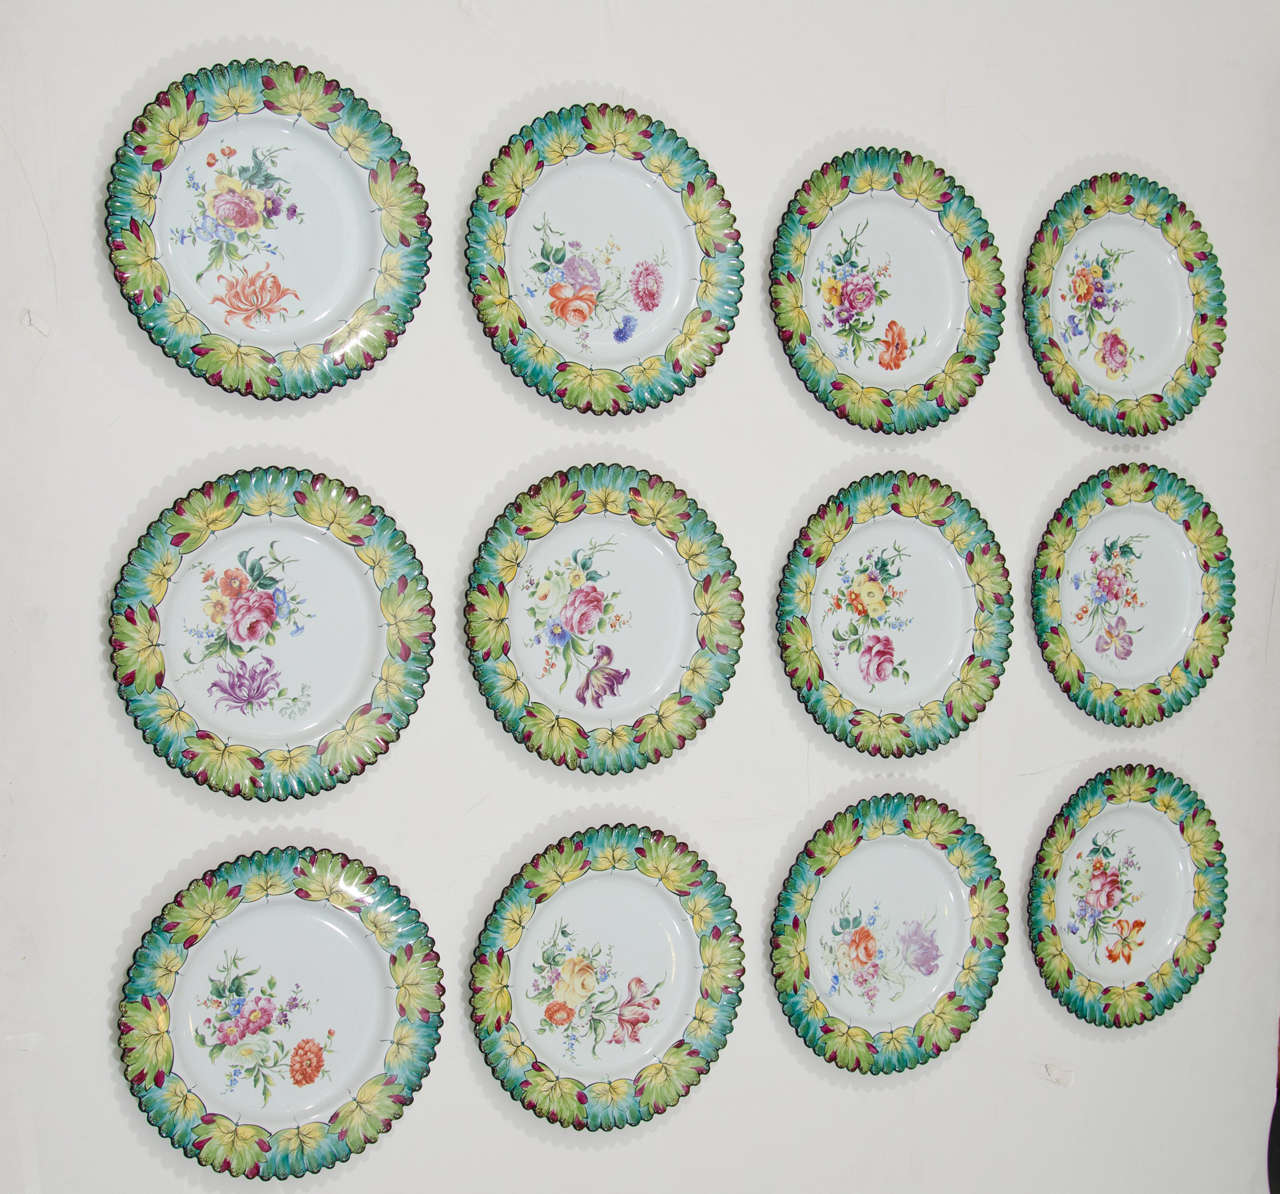 A vintage set of twelve rare hand-painted plates with scalloped edges by Camille Le Tallec for Tiffany & Co. Manufactured in 1964, and painted by an Artisan with initials G.M.

Ten plates are in perfect condition.  One plate has a tiny flea bite